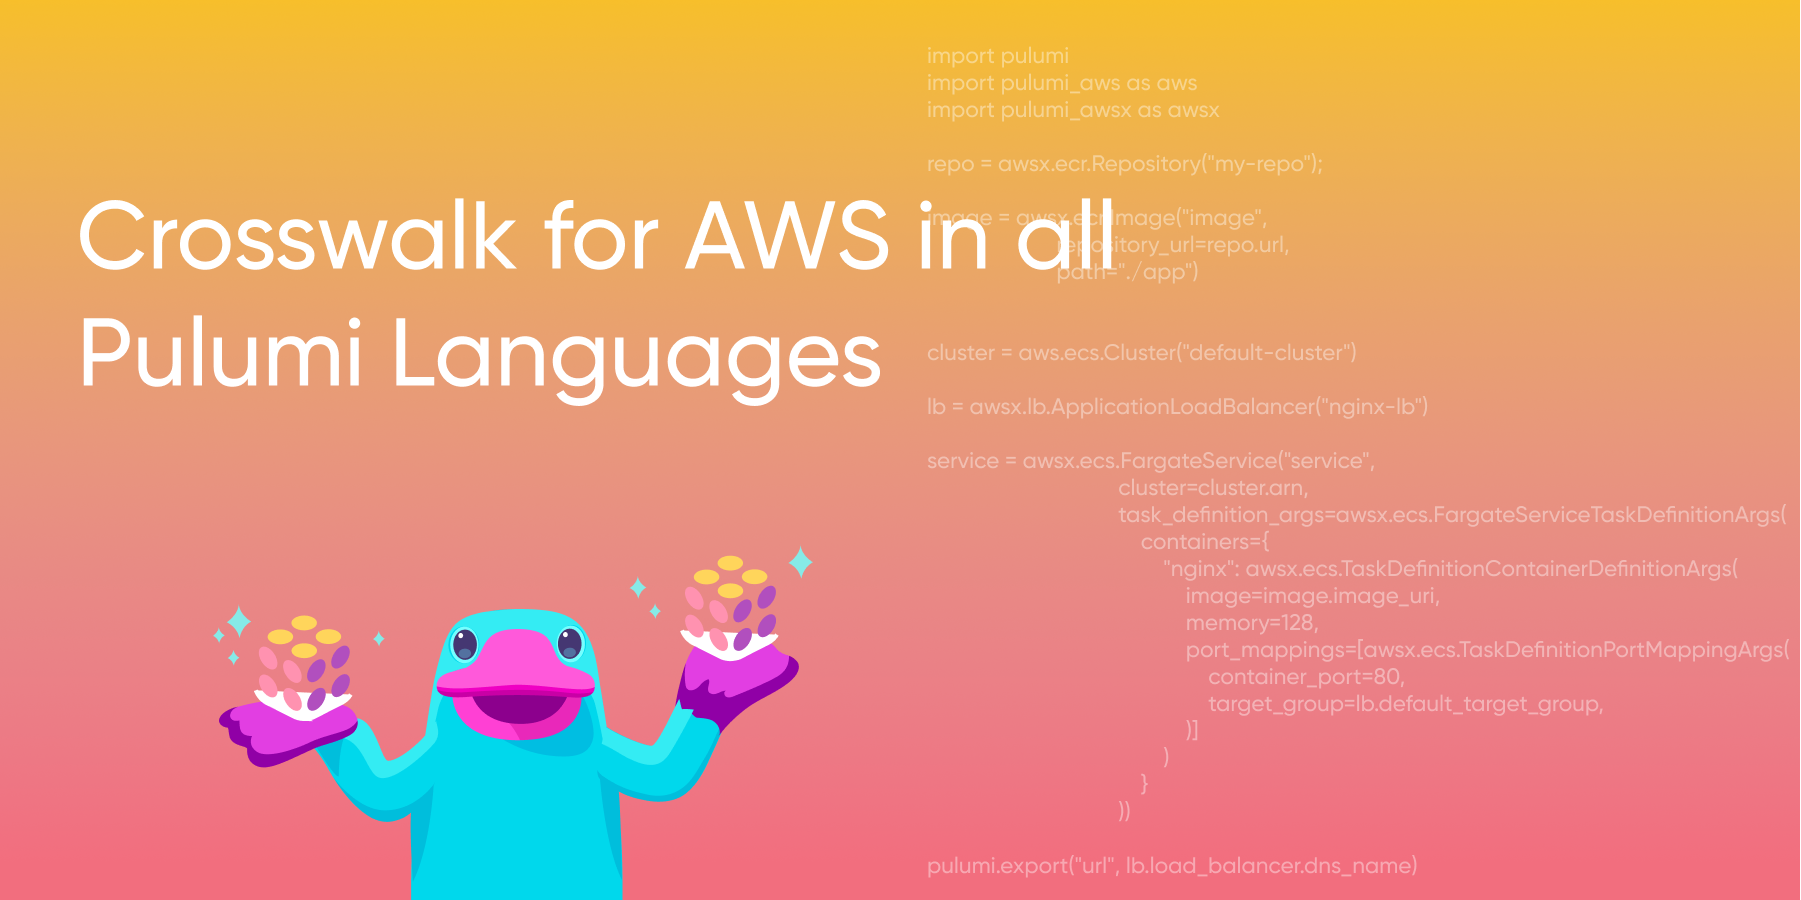 Announcing Crosswalk for AWS in all Pulumi Languages